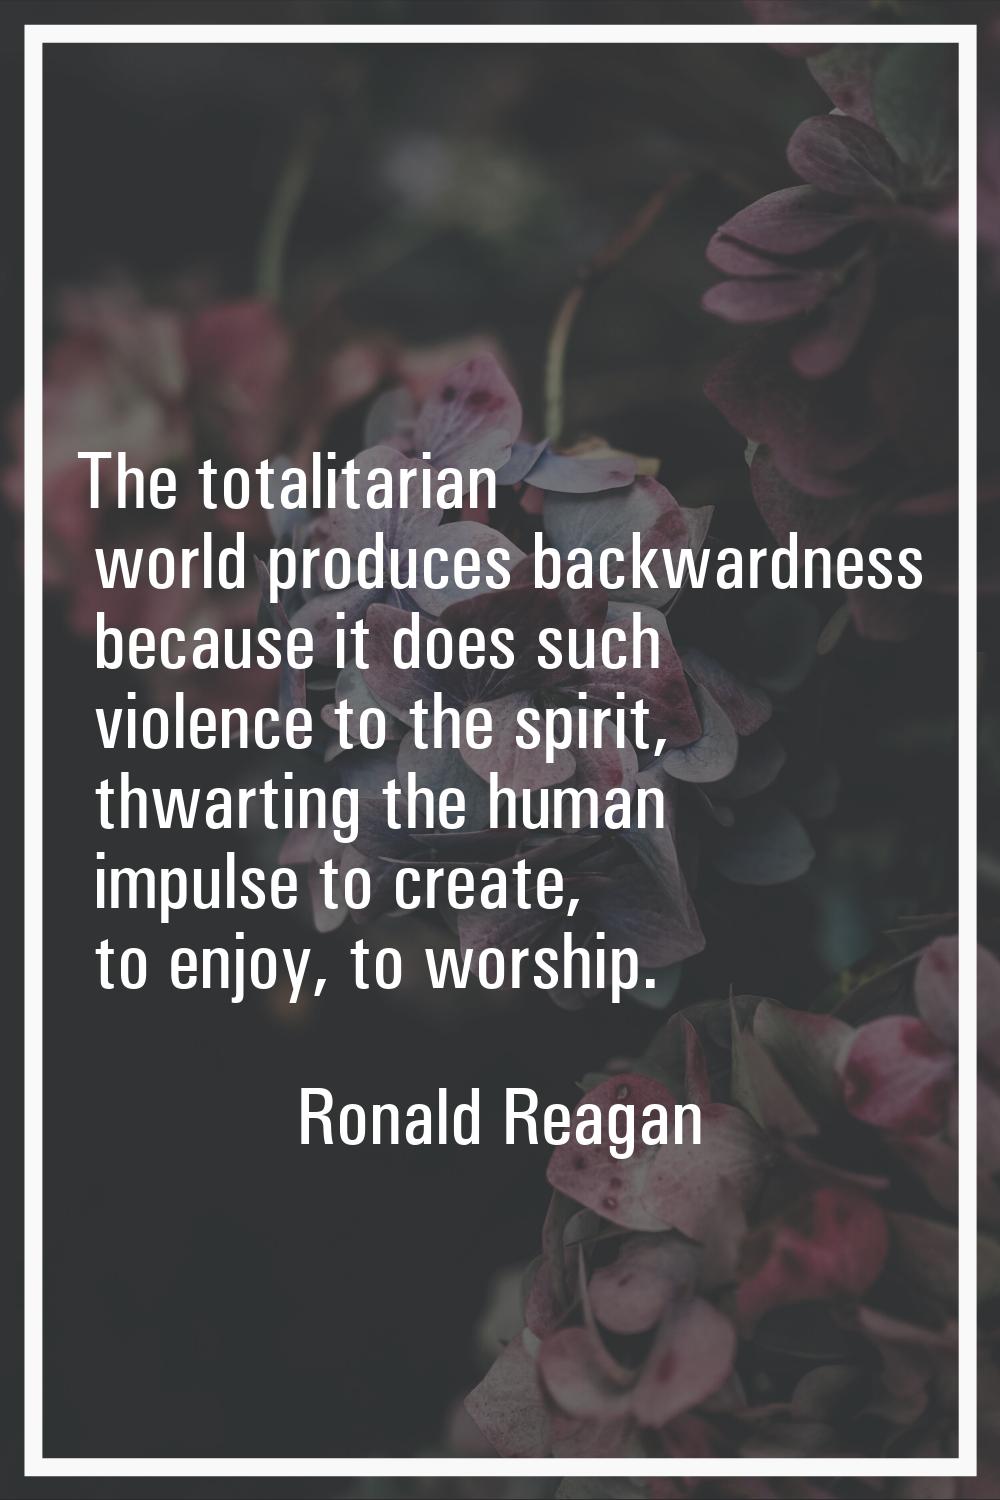 The totalitarian world produces backwardness because it does such violence to the spirit, thwarting